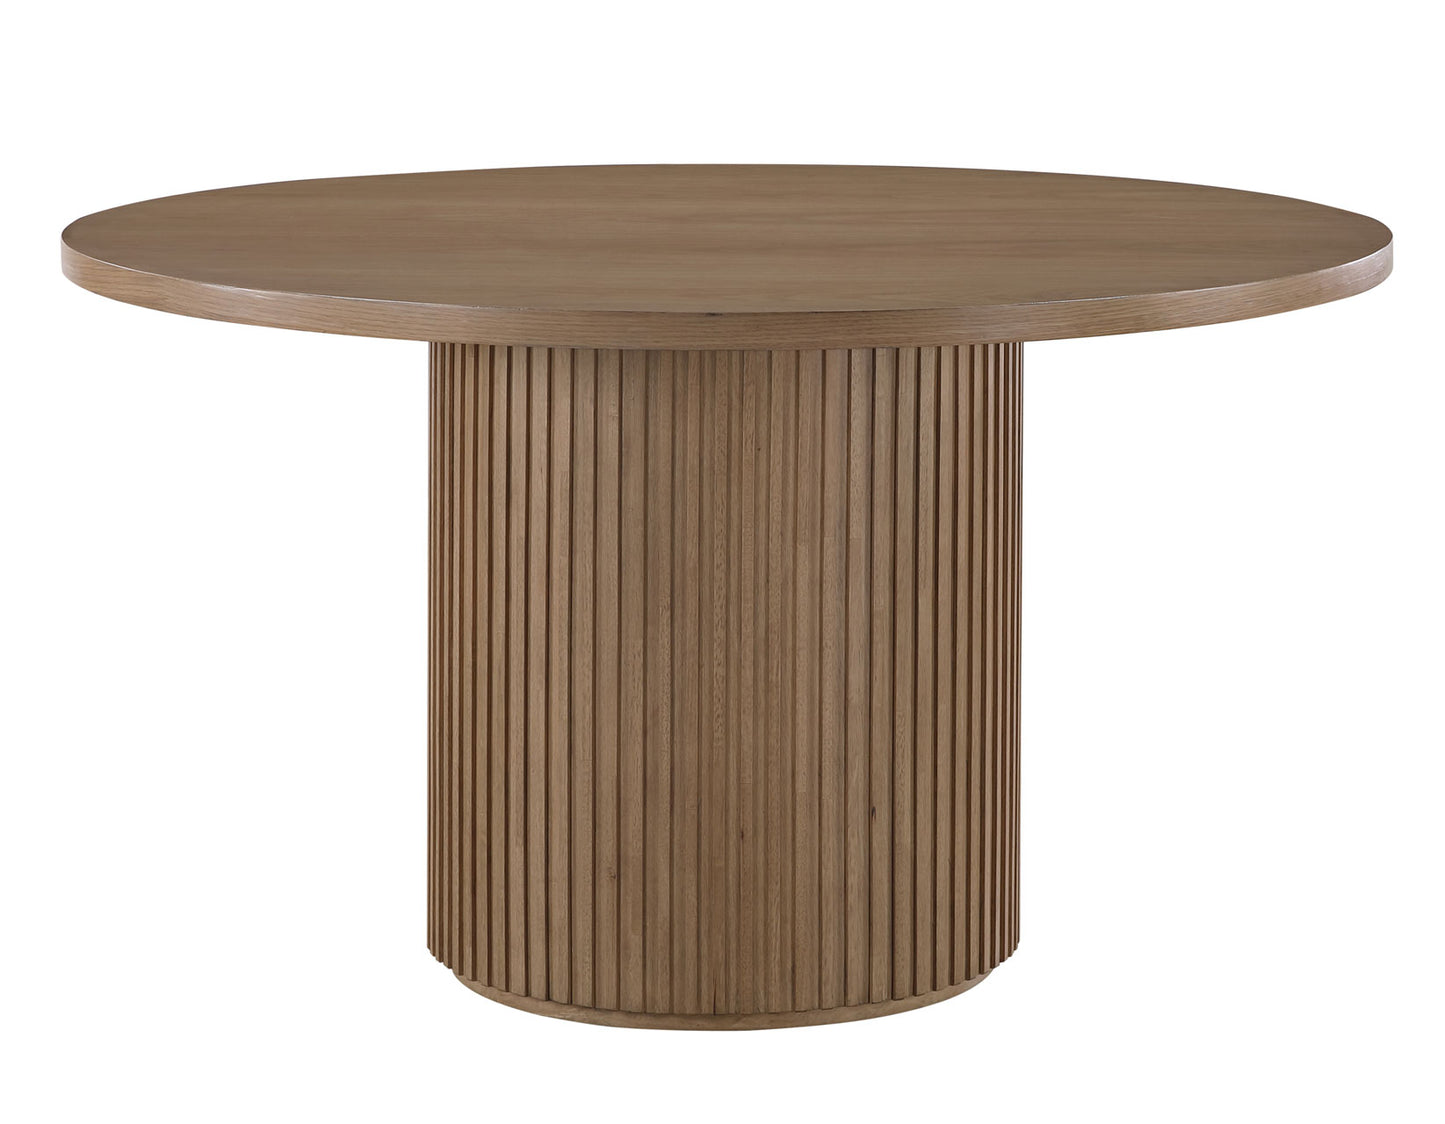 Colvin 52″ Round Dining Table, Toffee finish